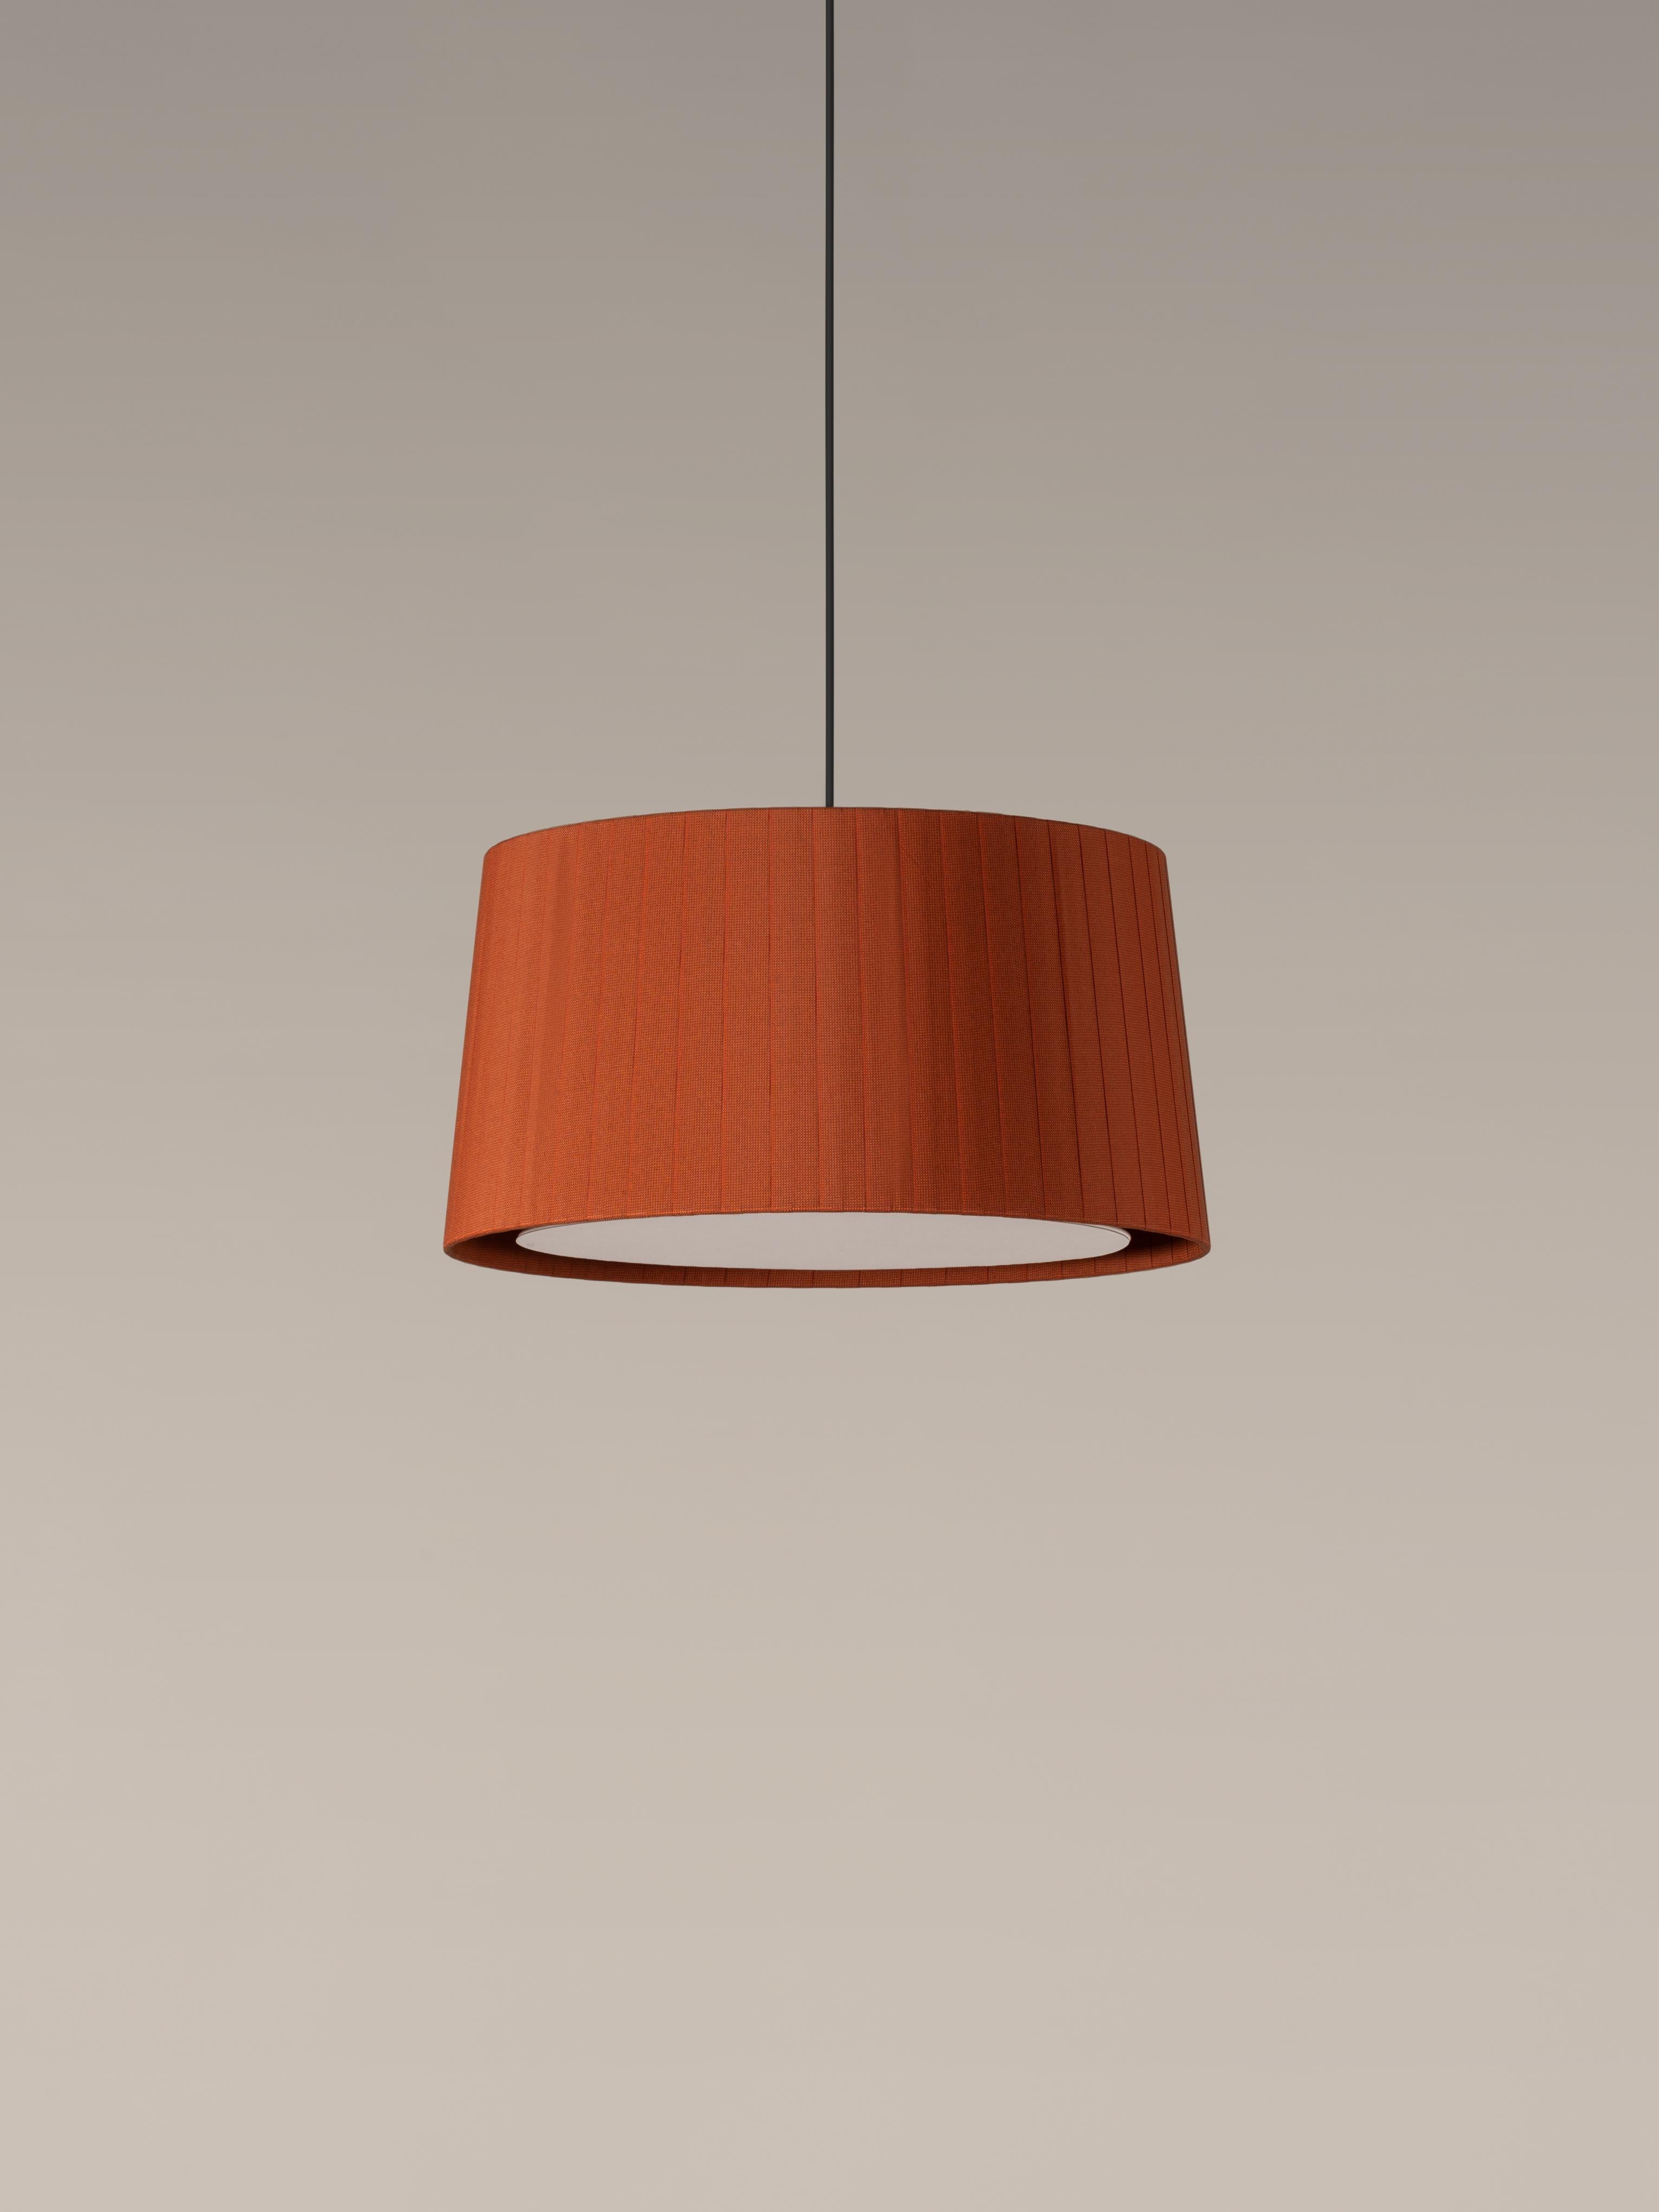 Terracotta GT6 pendant lamp by Santa & Cole
Dimensions: D 45 x H 23 cm
Materials: Metal, ribbon.
Available in other colors. Available in 2 lights version.

Designed for intermediate volumes and household areas, GT5 and GT6 are hanging lamps